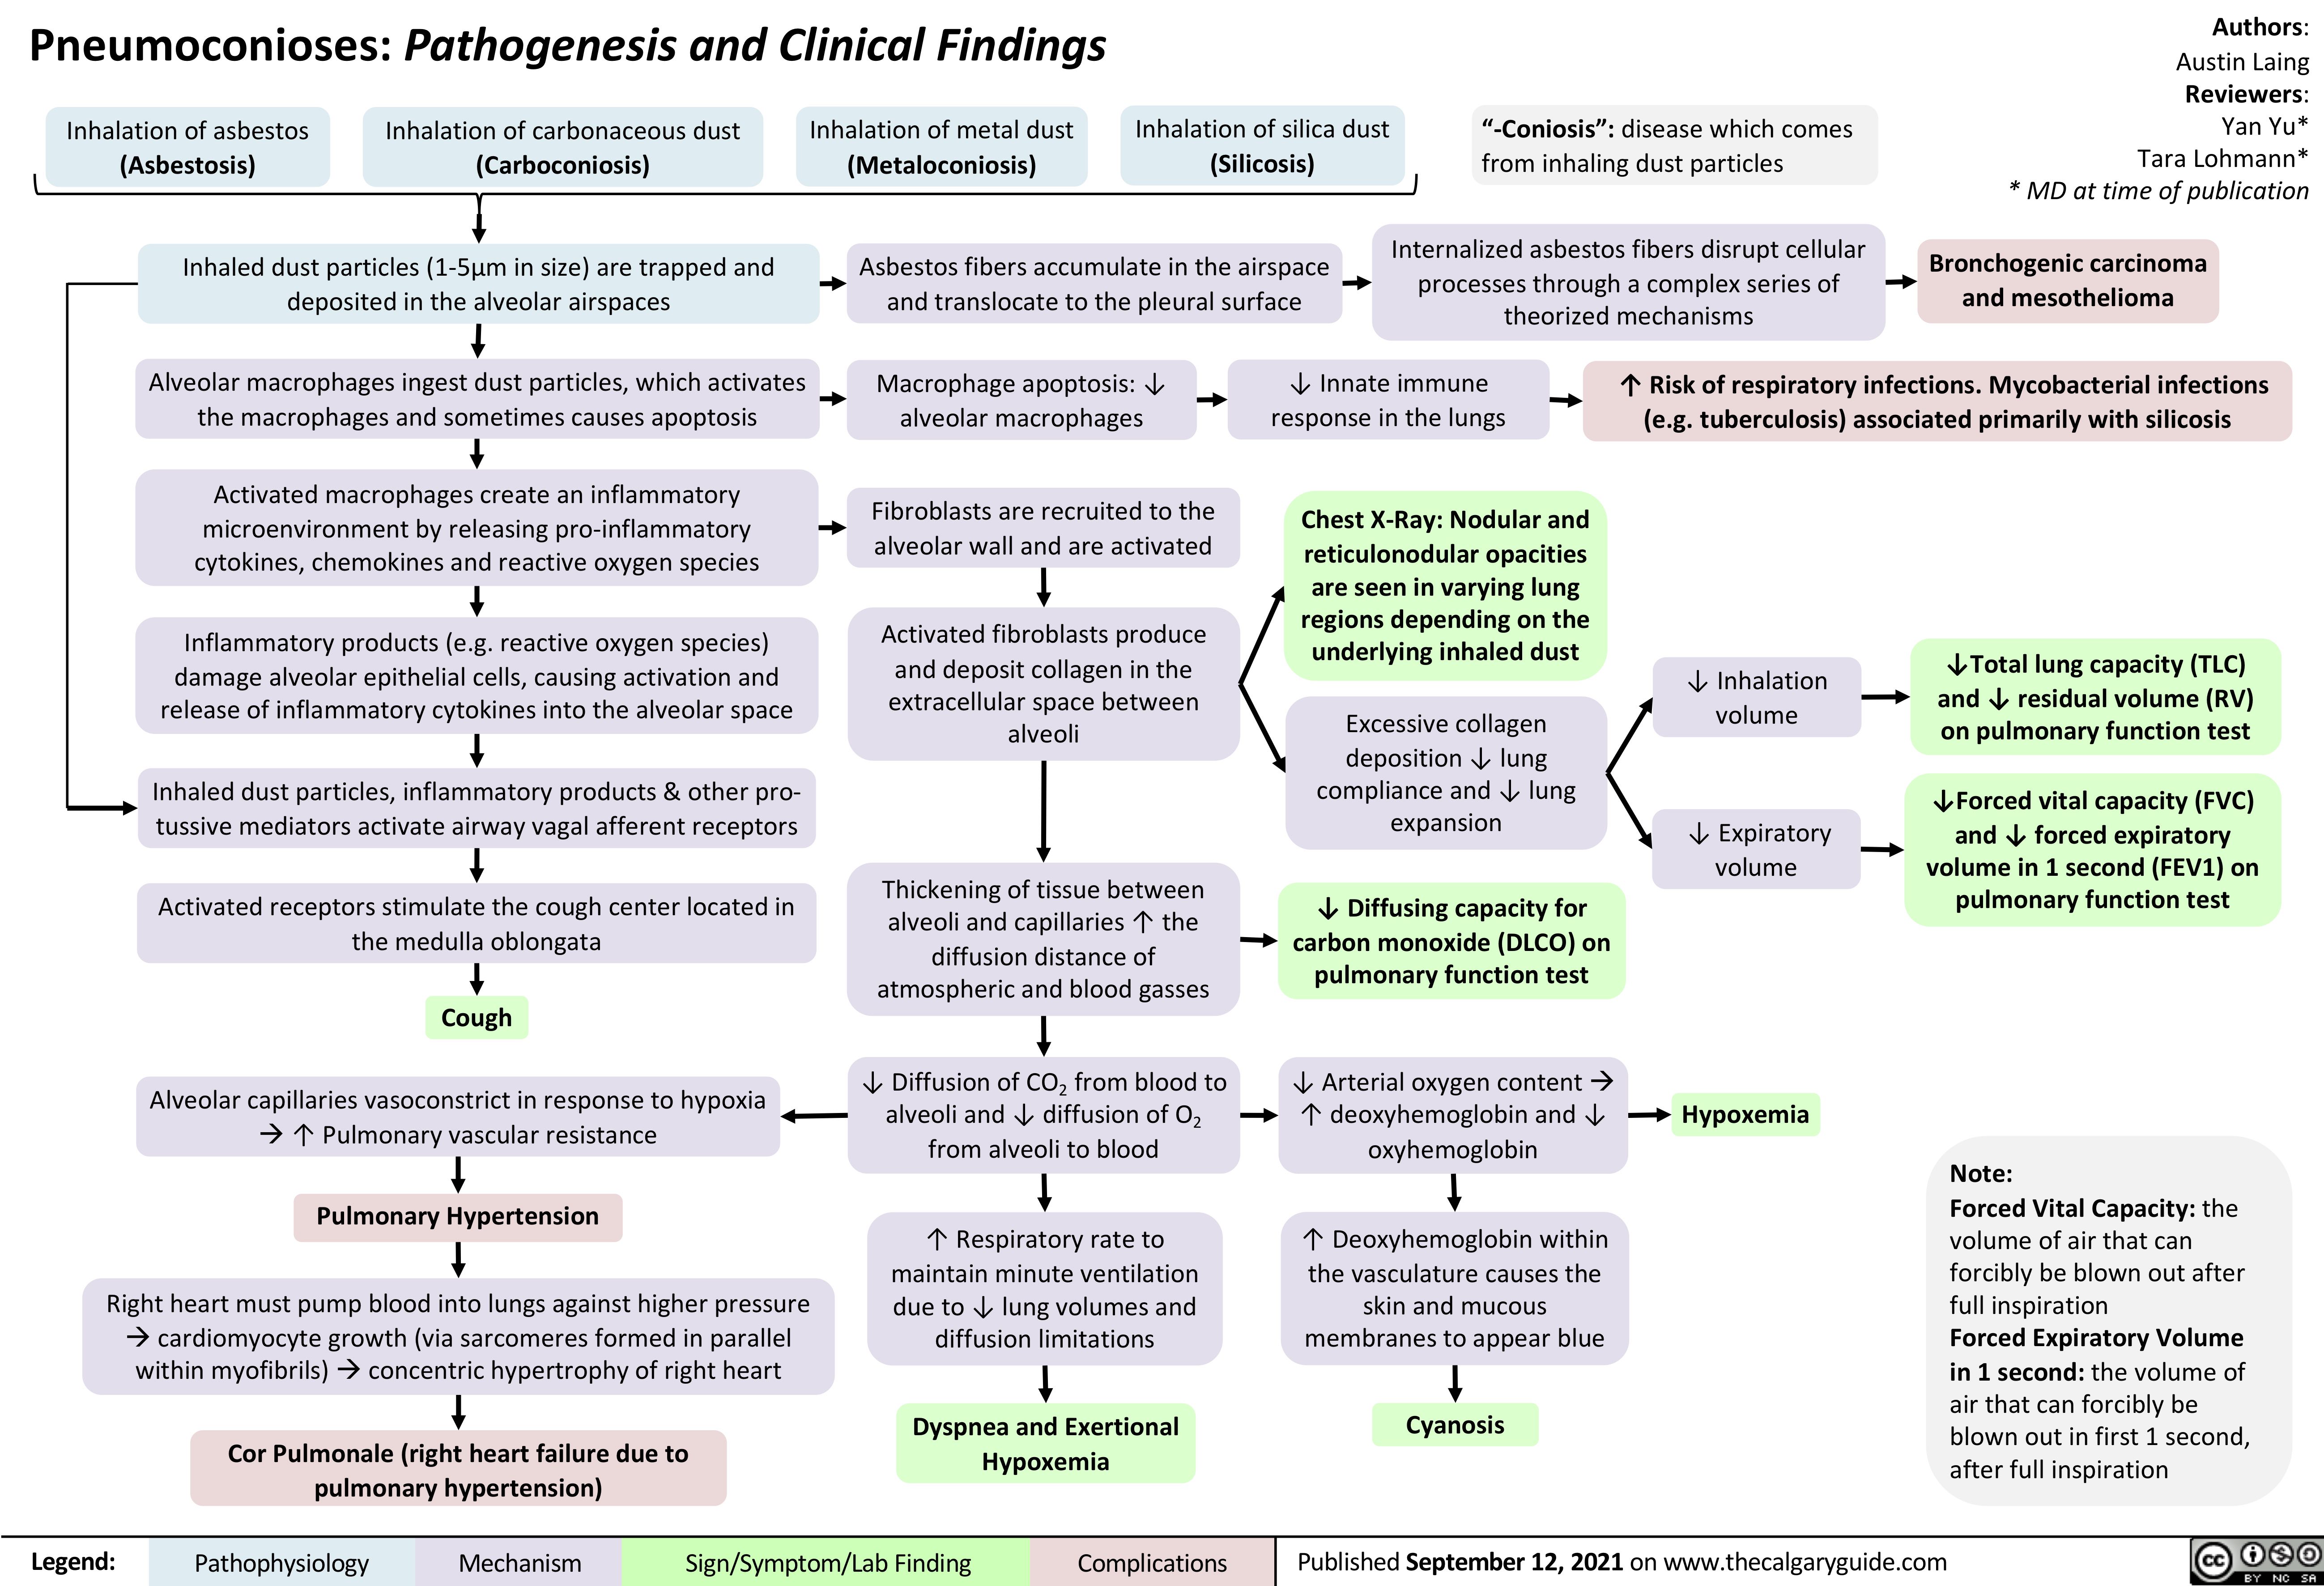 Pneumoconioses: Pathogenesis and Clinical Findings
Authors: Austin Laing
Reviewers: Yan Yu* Tara Lohmann* * MD at time of publication
Bronchogenic carcinoma and mesothelioma
     Inhalation of asbestos
(Asbestosis)
Inhalation of carbonaceous dust
(Carboconiosis)
Inhalation of metal dust
(Metaloconiosis)
Inhalation of silica dust
(Silicosis)
“-Coniosis”: disease which comes from inhaling dust particles
Internalized asbestos fibers disrupt cellular processes through a complex series of theorized mechanisms
      Inhaled dust particles (1-5μm in size) are trapped and deposited in the alveolar airspaces
Alveolar macrophages ingest dust particles, which activates the macrophages and sometimes causes apoptosis
Activated macrophages create an inflammatory microenvironment by releasing pro-inflammatory cytokines, chemokines and reactive oxygen species
Inflammatory products (e.g. reactive oxygen species) damage alveolar epithelial cells, causing activation and release of inflammatory cytokines into the alveolar space
Inhaled dust particles, inflammatory products & other pro- tussive mediators activate airway vagal afferent receptors
Activated receptors stimulate the cough center located in the medulla oblongata
Cough
Alveolar capillaries vasoconstrict in response to hypoxia à↑ Pulmonary vascular resistance
Pulmonary Hypertension
Right heart must pump blood into lungs against higher pressure àcardiomyocyte growth (via sarcomeres formed in parallel within myofibrils)àconcentric hypertrophy of right heart
Cor Pulmonale (right heart failure due to pulmonary hypertension)
Asbestos fibers accumulate in the airspace and translocate to the pleural surface
         Macrophage apoptosis: ↓ alveolar macrophages
Fibroblasts are recruited to the alveolar wall and are activated
Activated fibroblasts produce and deposit collagen in the
extracellular space between alveoli
Thickening of tissue between alveoli and capillaries ↑ the diffusion distance of atmospheric and blood gasses
↓ Diffusion of CO2 from blood to alveoli and ↓ diffusion of O2 from alveoli to blood
↑ Respiratory rate to maintain minute ventilation due to ↓ lung volumes and diffusion limitations
Dyspnea and Exertional Hypoxemia
↓ Innate immune response in the lungs
Chest X-Ray: Nodular and reticulonodular opacities are seen in varying lung regions depending on the underlying inhaled dust
Excessive collagen
deposition ↓ lung compliance and ↓ lung expansion
↓ Diffusing capacity for carbon monoxide (DLCO) on pulmonary function test
↓ Arterial oxygen contentà ↑ deoxyhemoglobin and ↓ oxyhemoglobin
↑ Deoxyhemoglobin within the vasculature causes the skin and mucous membranes to appear blue
Cyanosis
↑ Risk of respiratory infections. Mycobacterial infections (e.g. tuberculosis) associated primarily with silicosis
               ↓ Inhalation volume
↓ Expiratory volume
Hypoxemia
↓Total lung capacity (TLC) and ↓ residual volume (RV) on pulmonary function test
↓Forced vital capacity (FVC) and ↓ forced expiratory volume in 1 second (FEV1) on pulmonary function test
                          Note:
Forced Vital Capacity: the volume of air that can forcibly be blown out after full inspiration
Forced Expiratory Volume in 1 second: the volume of air that can forcibly be blown out in first 1 second, after full inspiration
               Legend:
 Pathophysiology
Mechanism
Sign/Symptom/Lab Finding
  Complications
 Published September 12, 2021 on www.thecalgaryguide.com
   